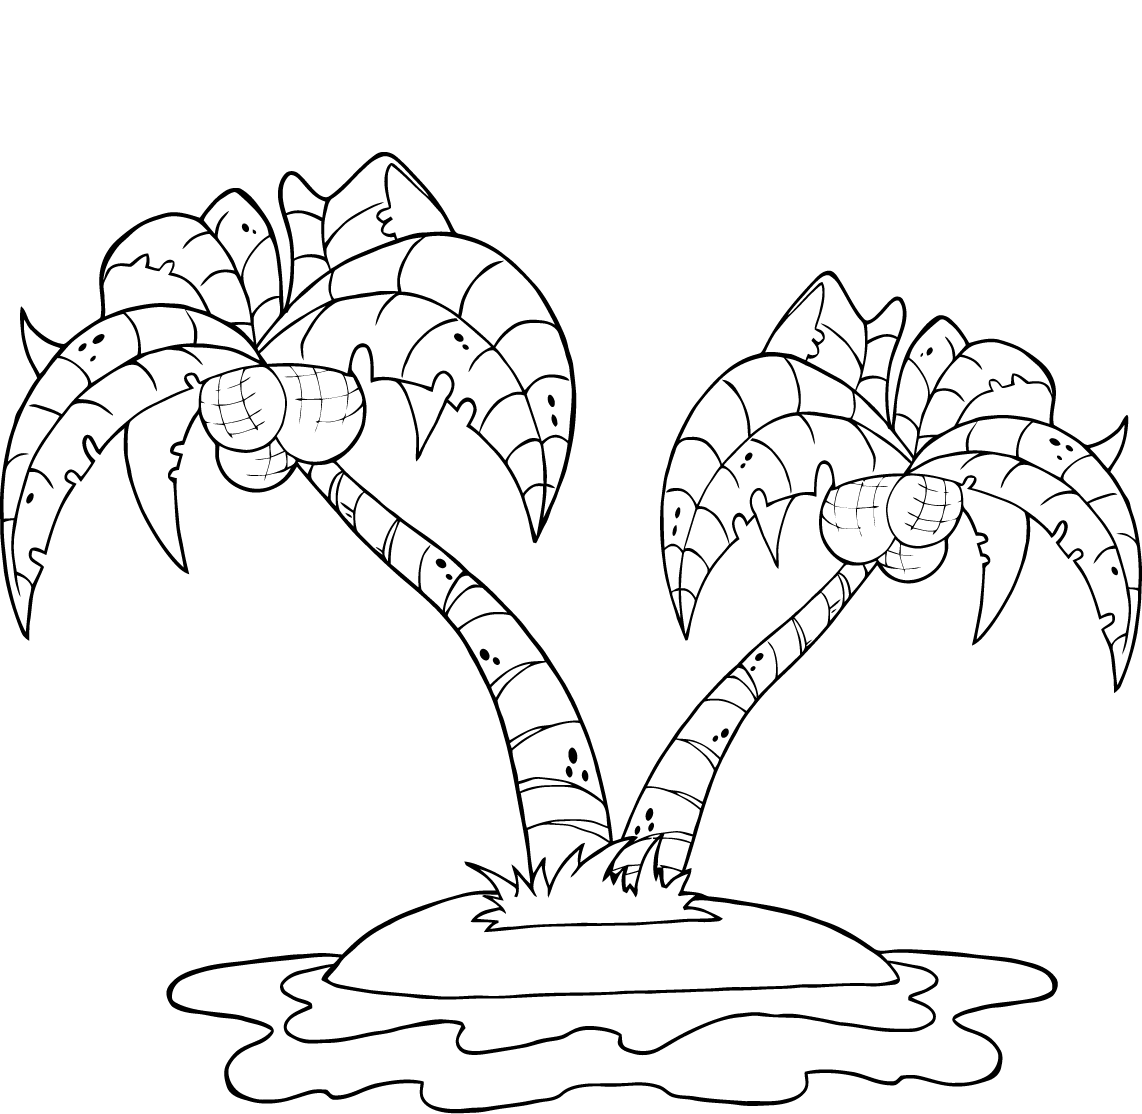 Coconut Palm Trees On Island Coloring Page